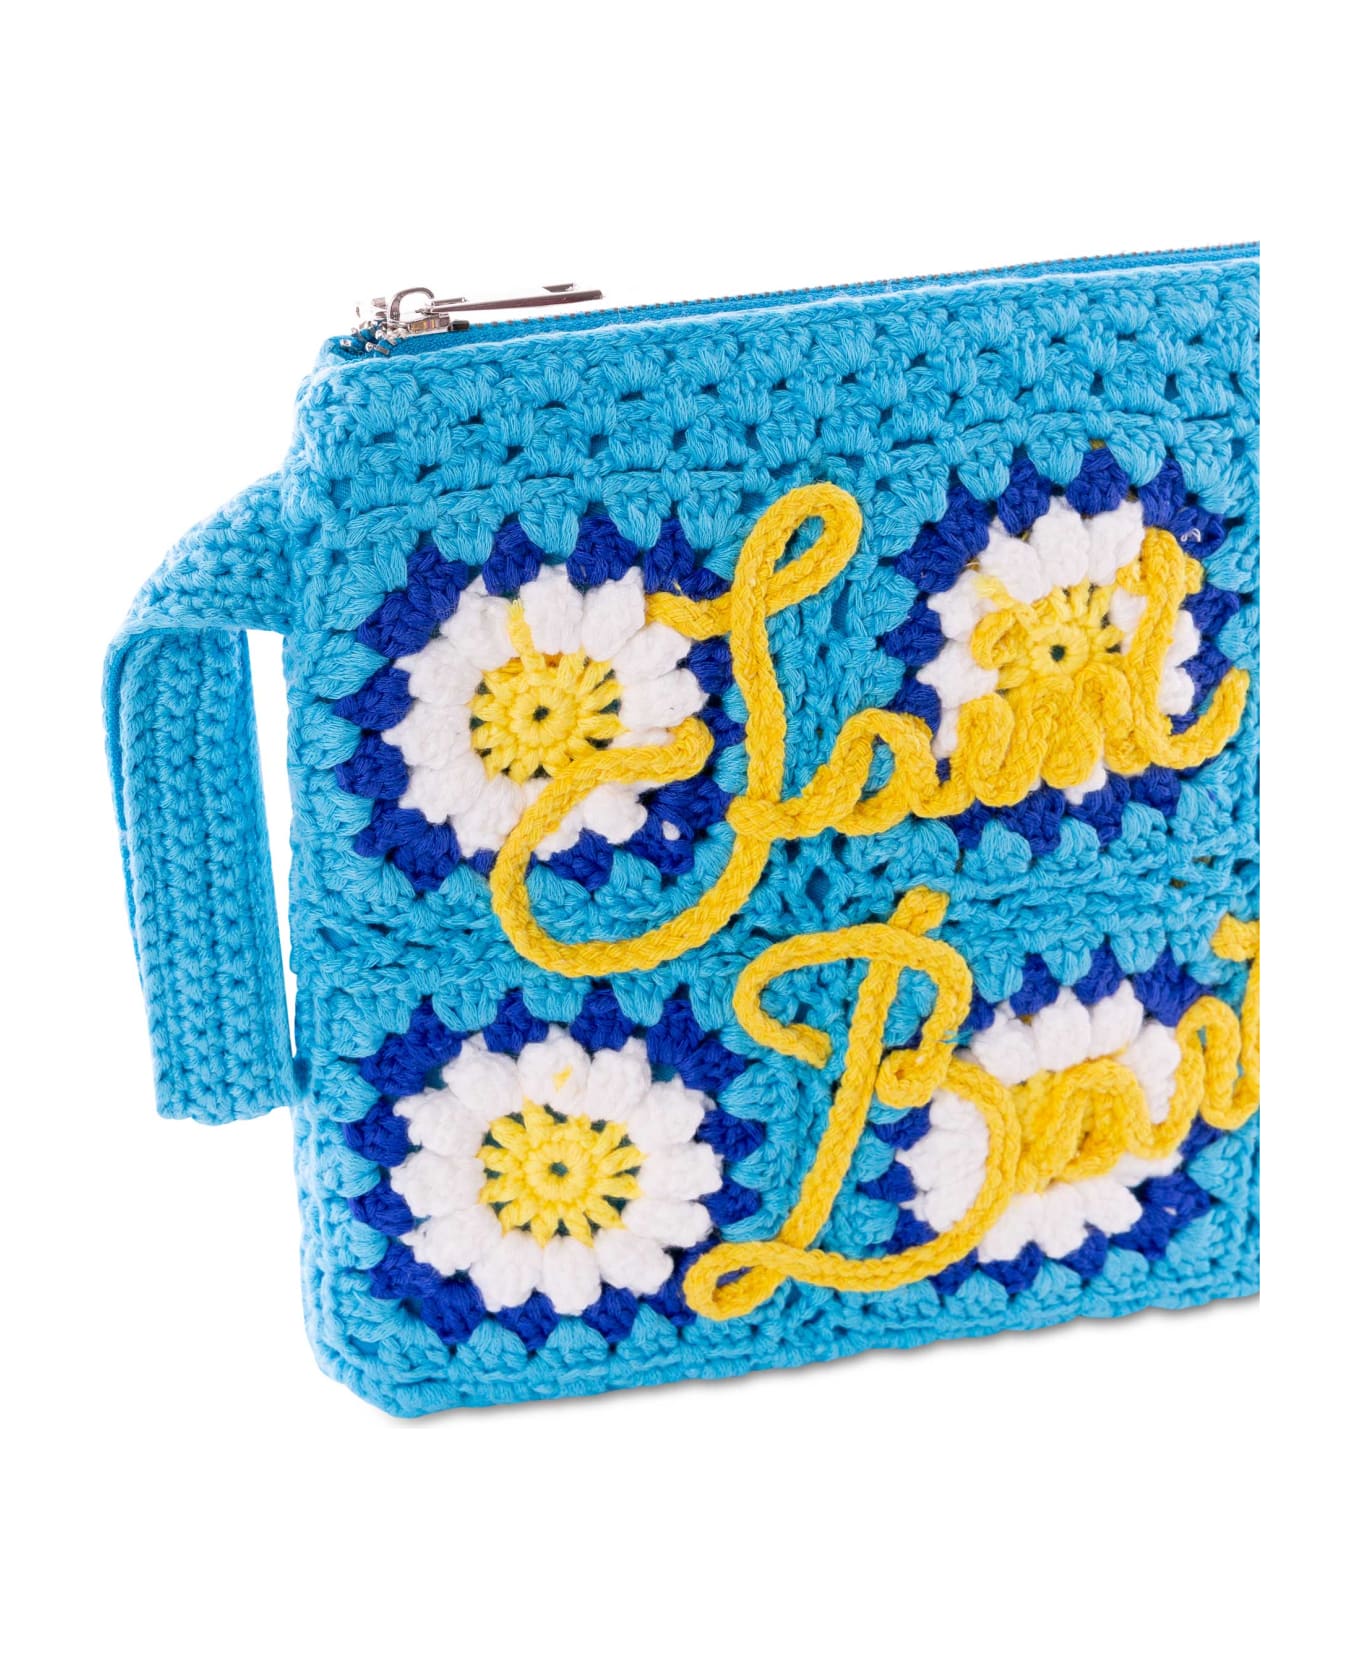 MC2 Saint Barth Parisienne Crochet Pouch Bag With Daisy Embroidery - BLUE トラベルバッグ